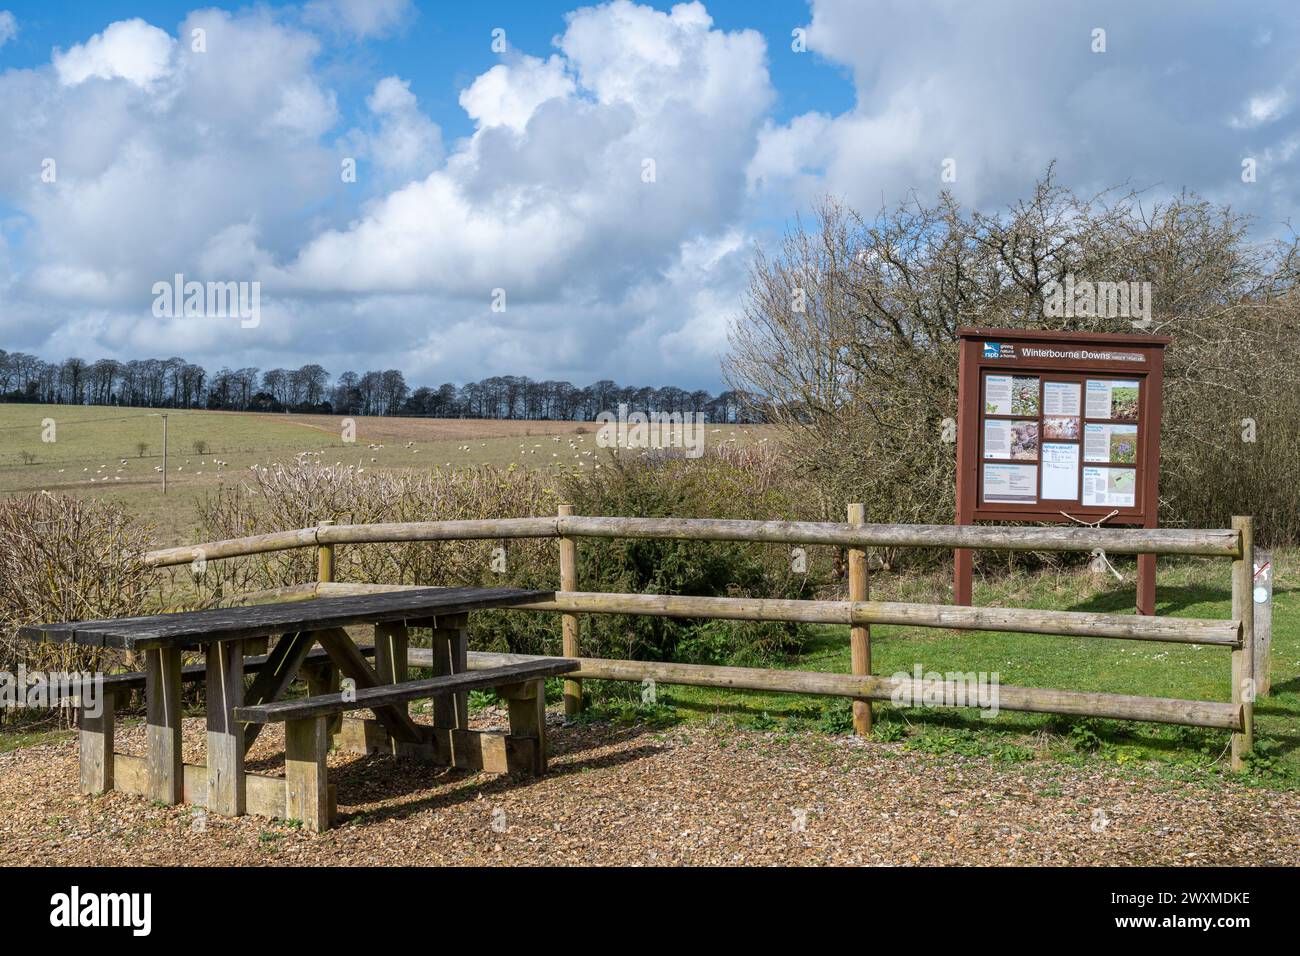 RSPB Winterbourne Downs nature reserve in Spring, Wiltshire, England, UK. View of the information board and chalk farmland habitat Stock Photo